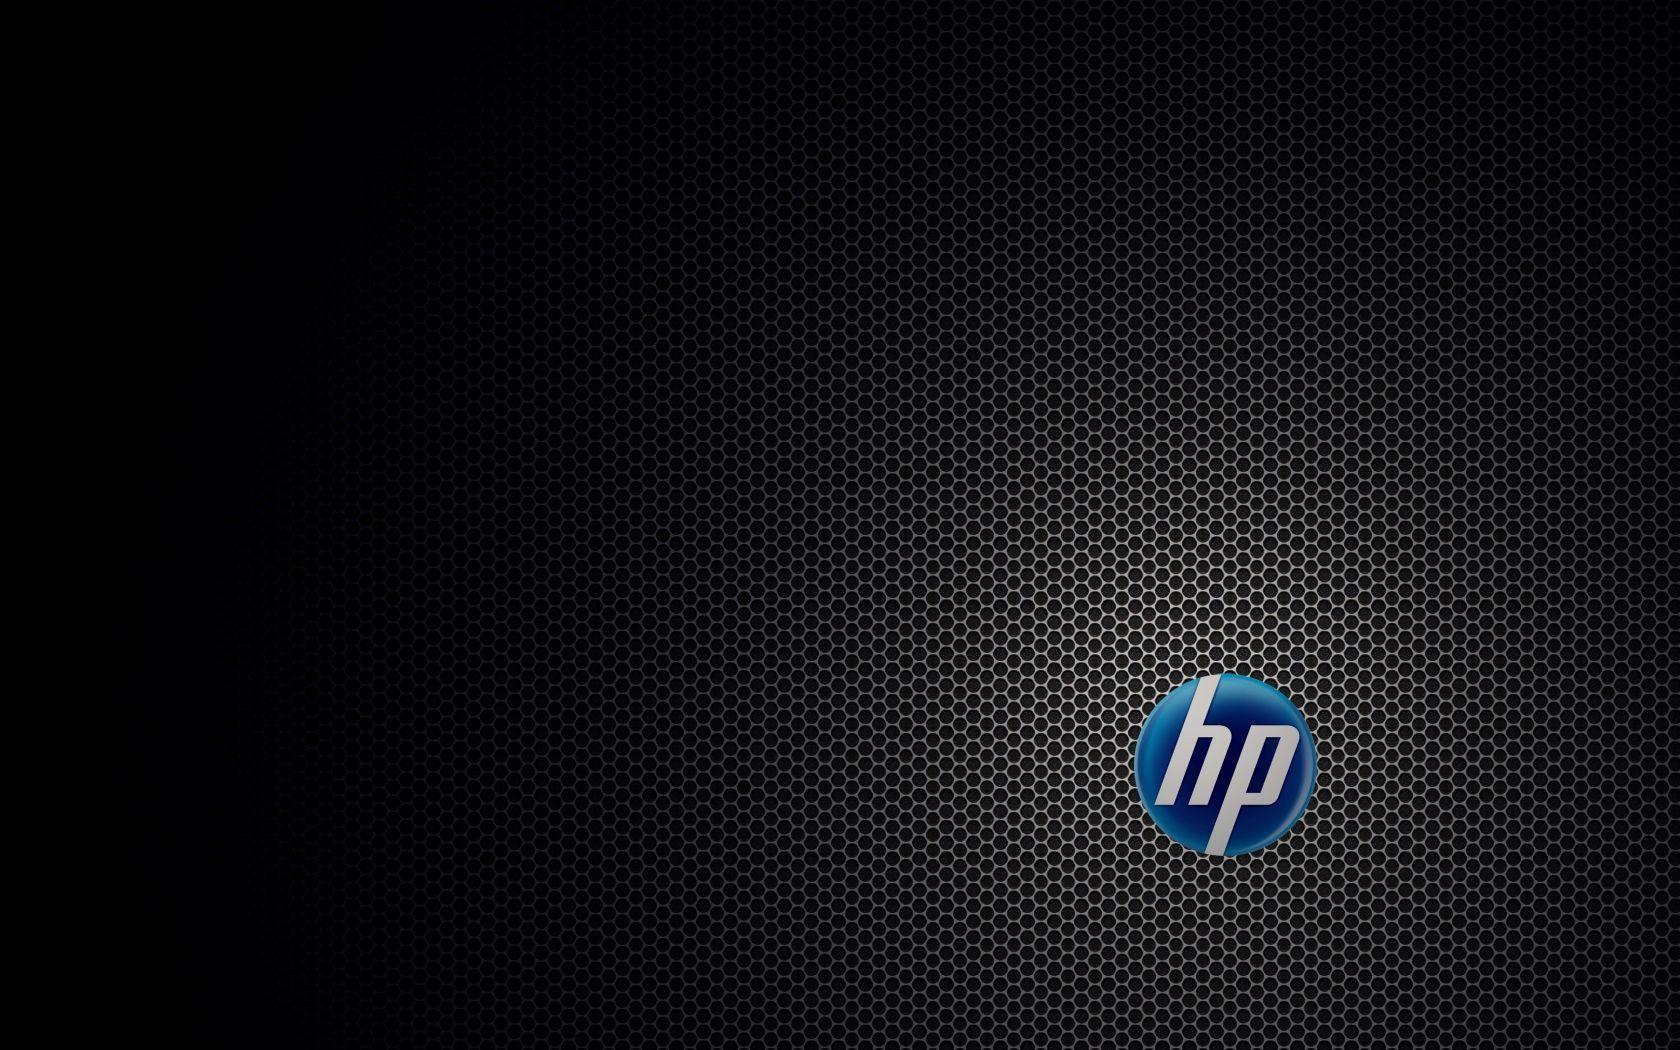 HP Spider Wall wallpaper. HP Spider Wall